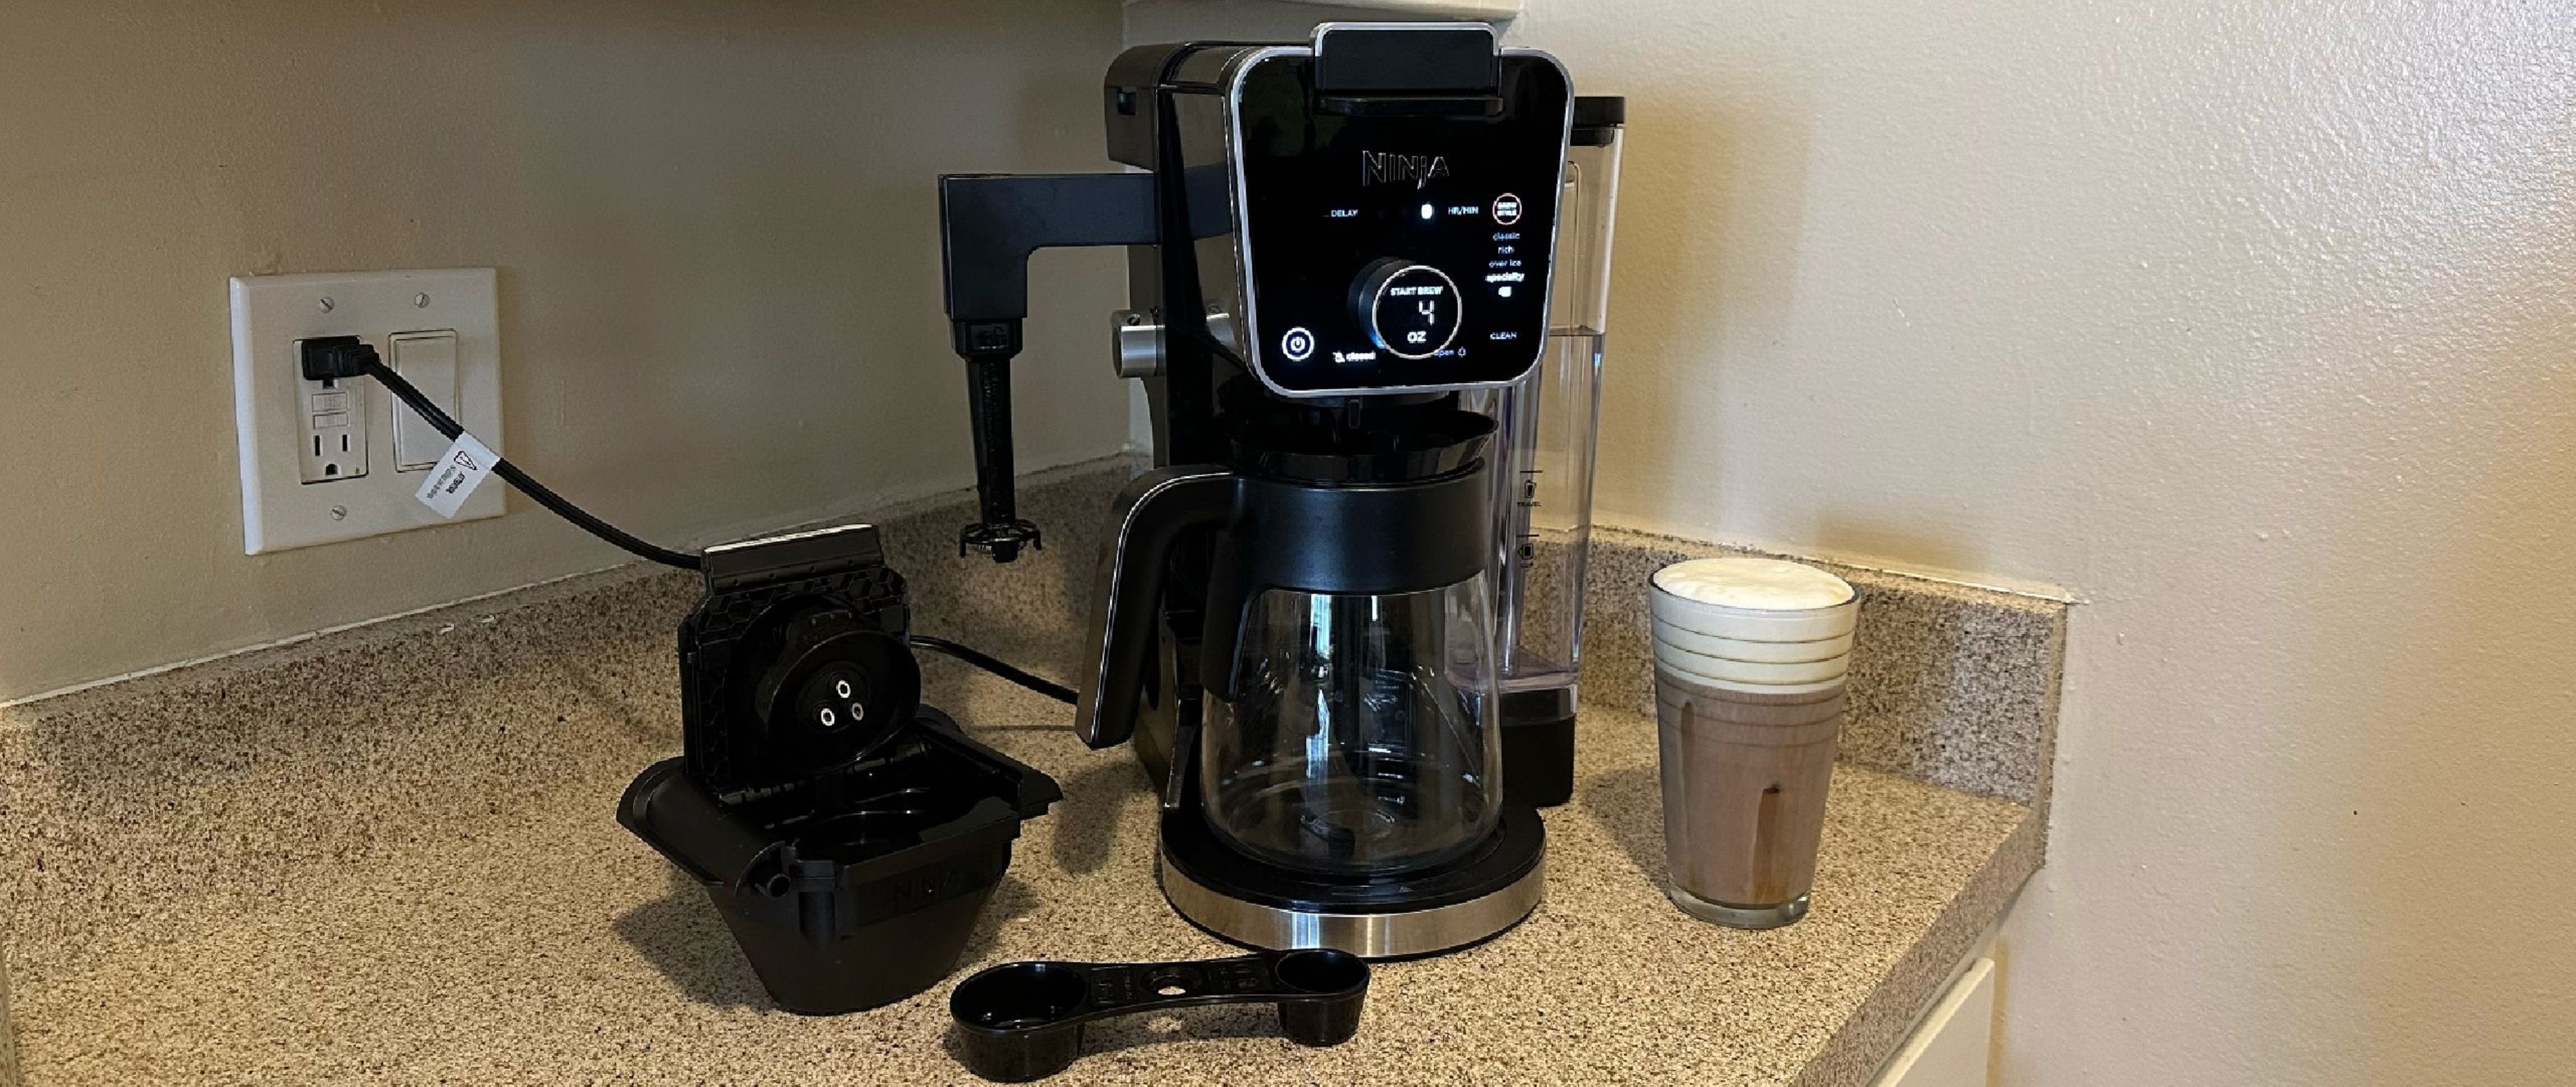 Ninja DualBrew Pro review: an advanced pour over coffee maker for all  levels